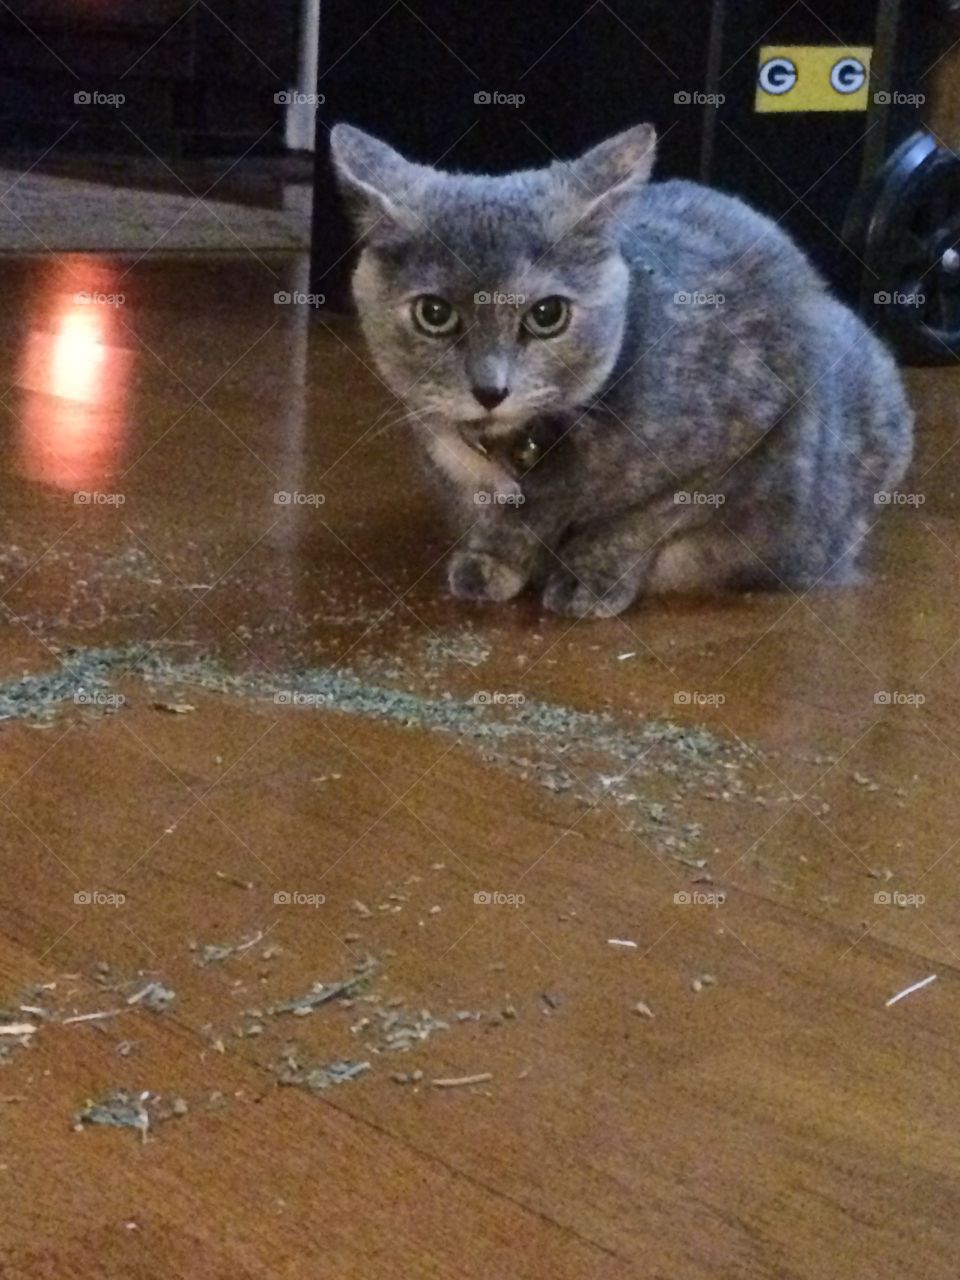 Don't touch my catnip!